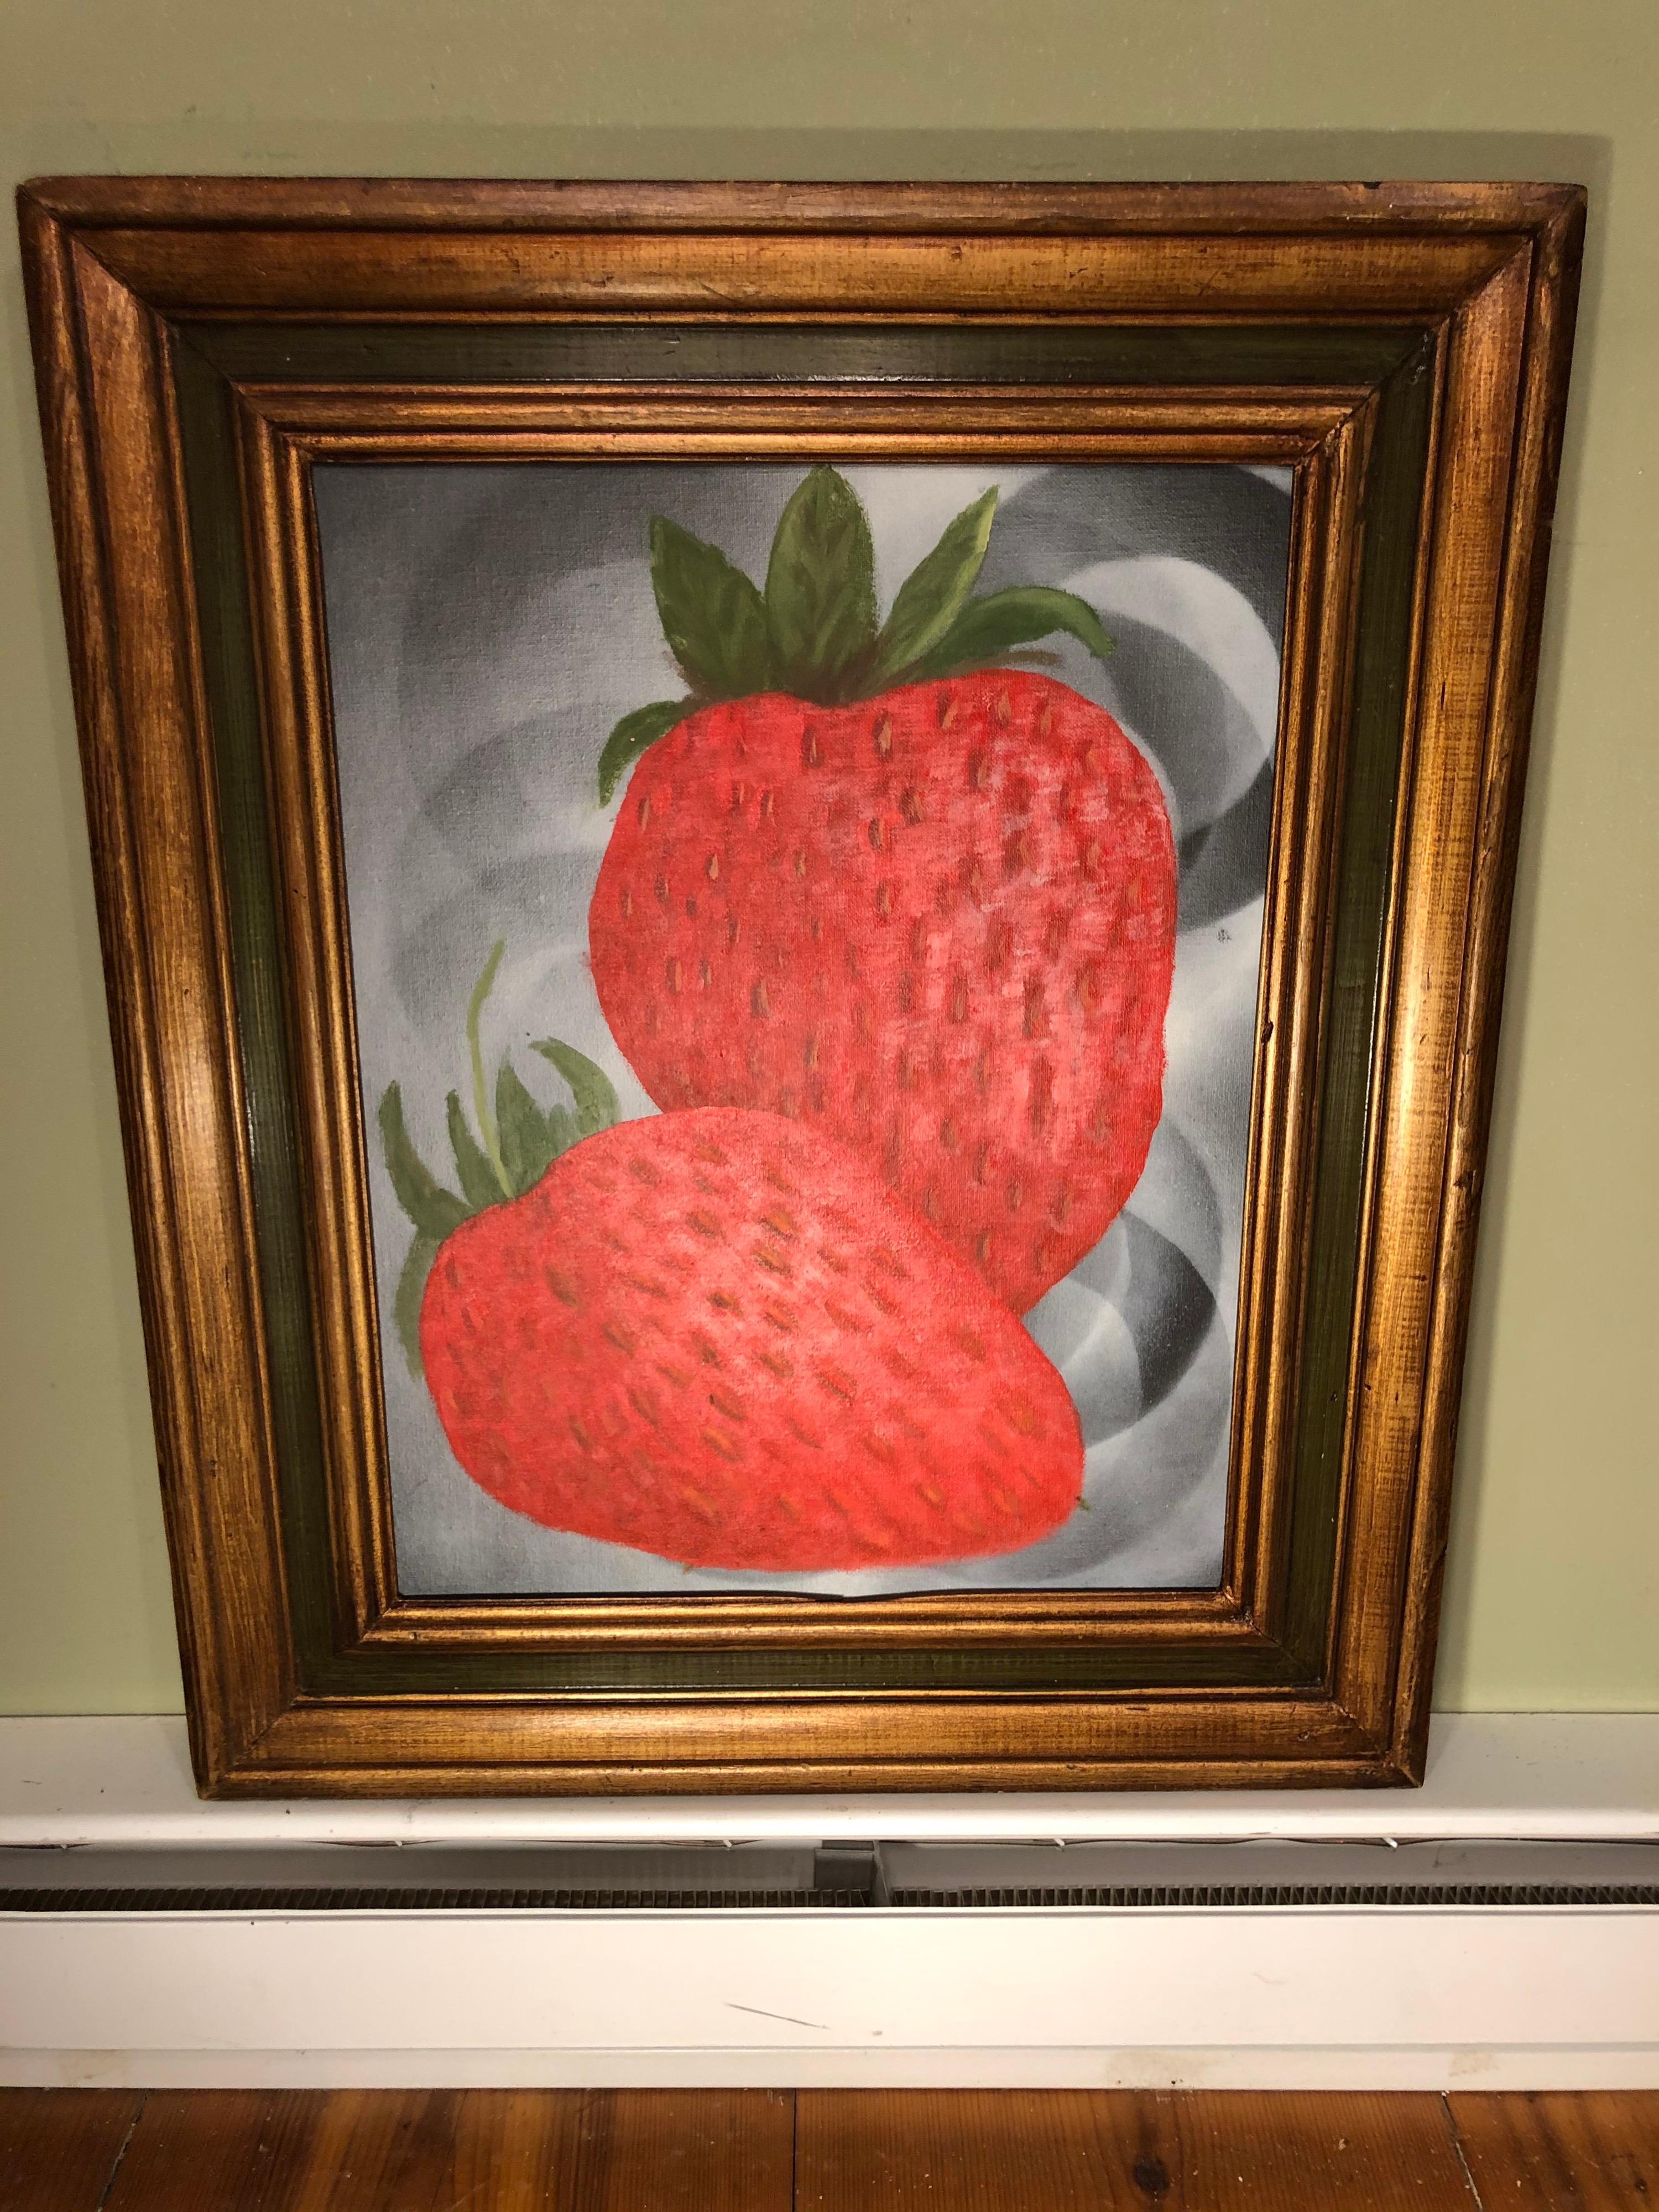 Modern Still Life of strawberries. Fruit still life on masonite. Framed in a solid wooden frame with green tones.